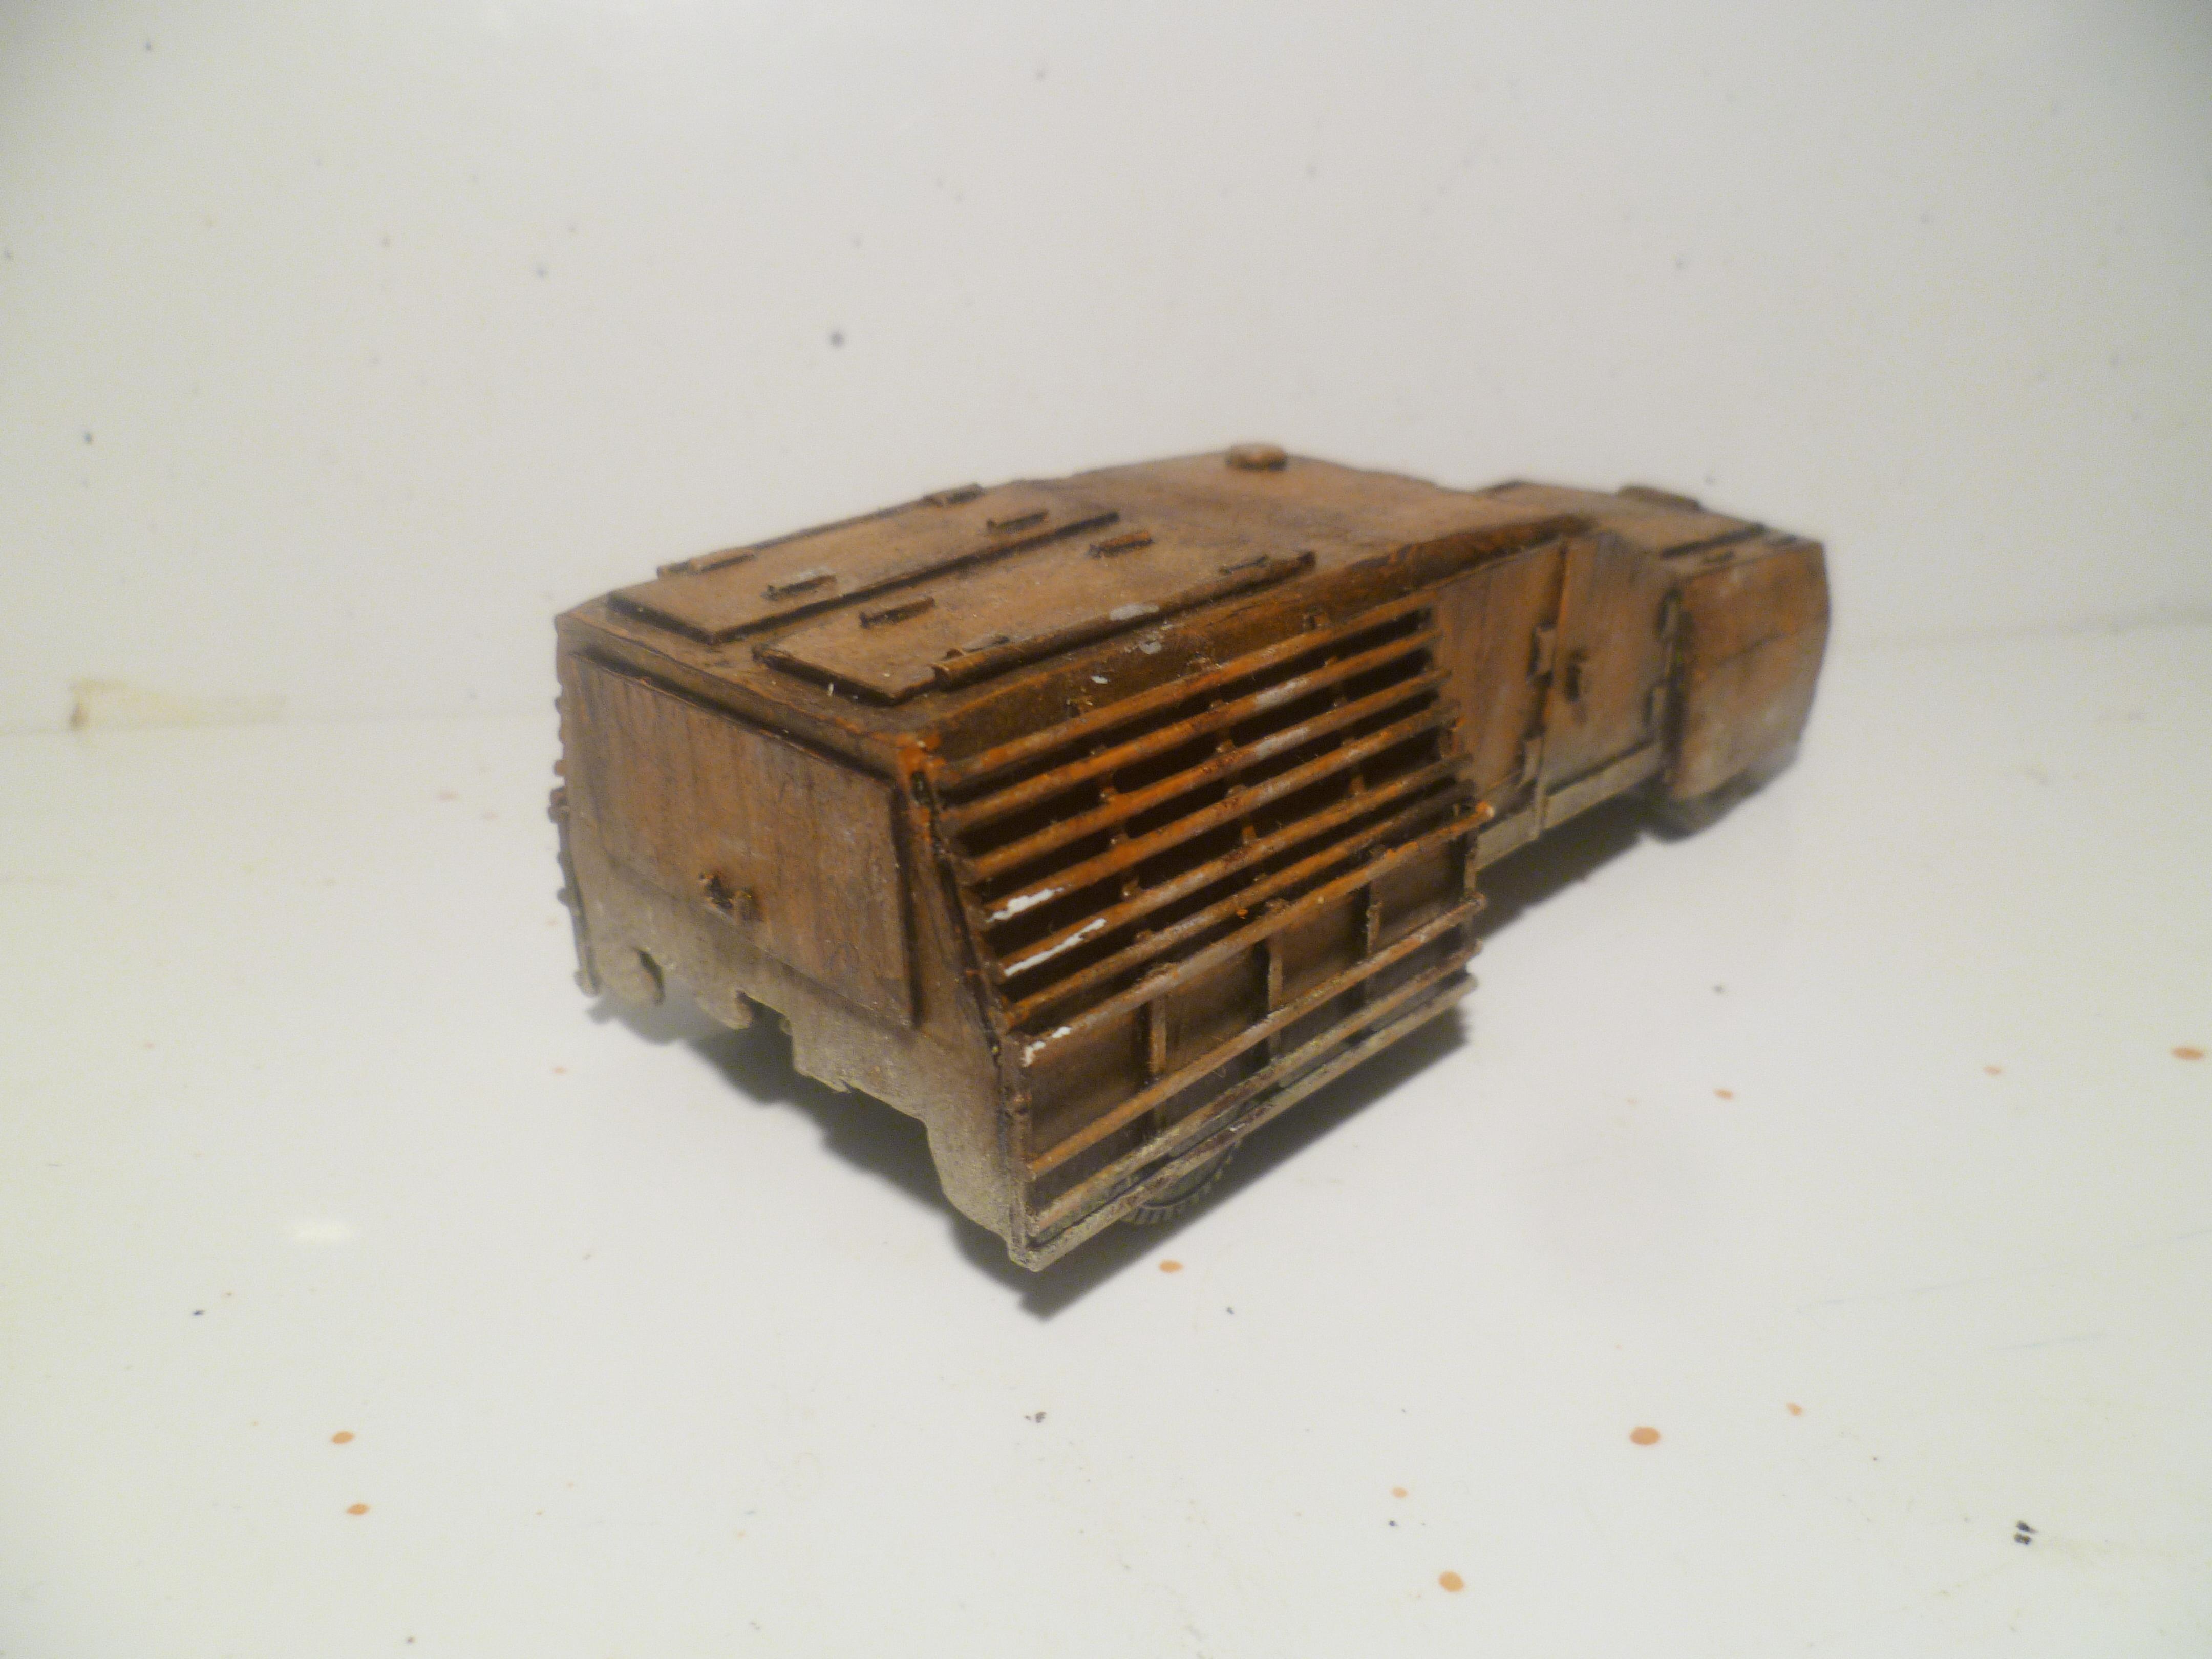 28mm, Armoured, Cars, Conversion, Desert, Insurgent, Mad Max, Middle East, Modern, Post Apocalyptic, Rust, Rusty, Technical, Vehicle